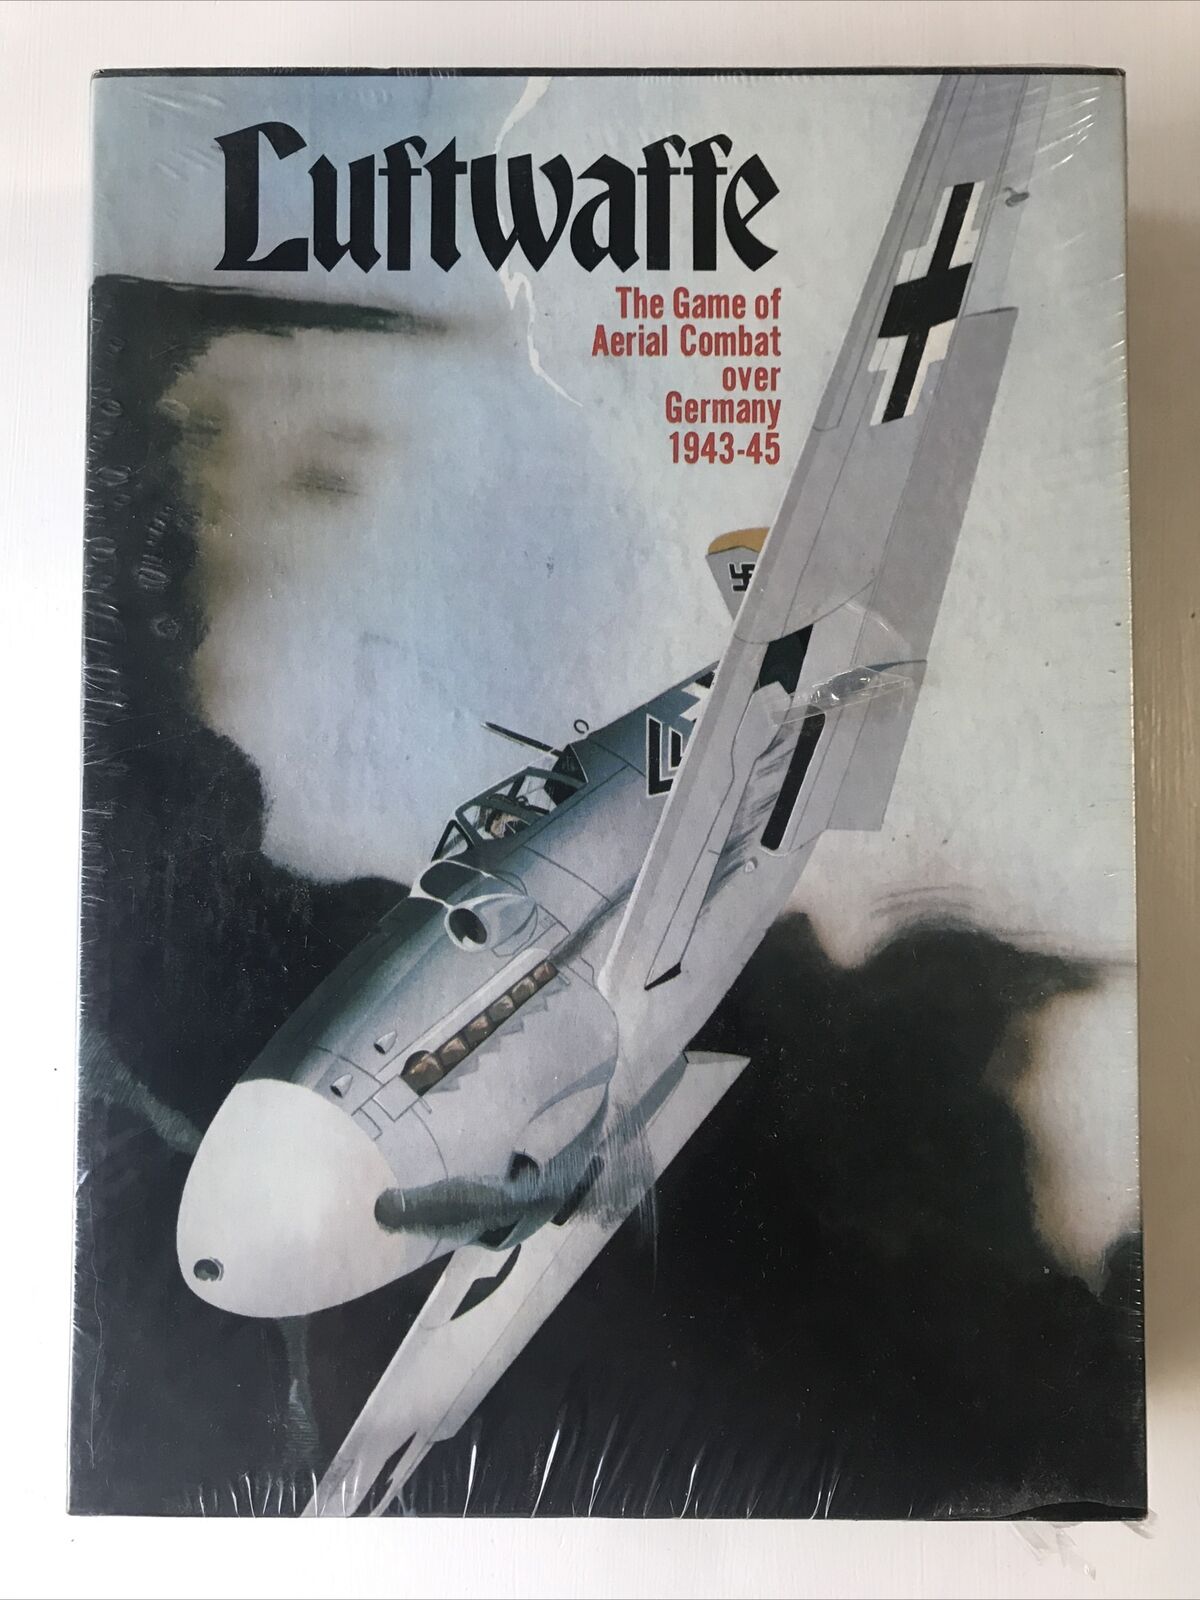 Luftwaffe The Game OF Aerial Combat Over Germany from Avalon Hill (New - Sealed)